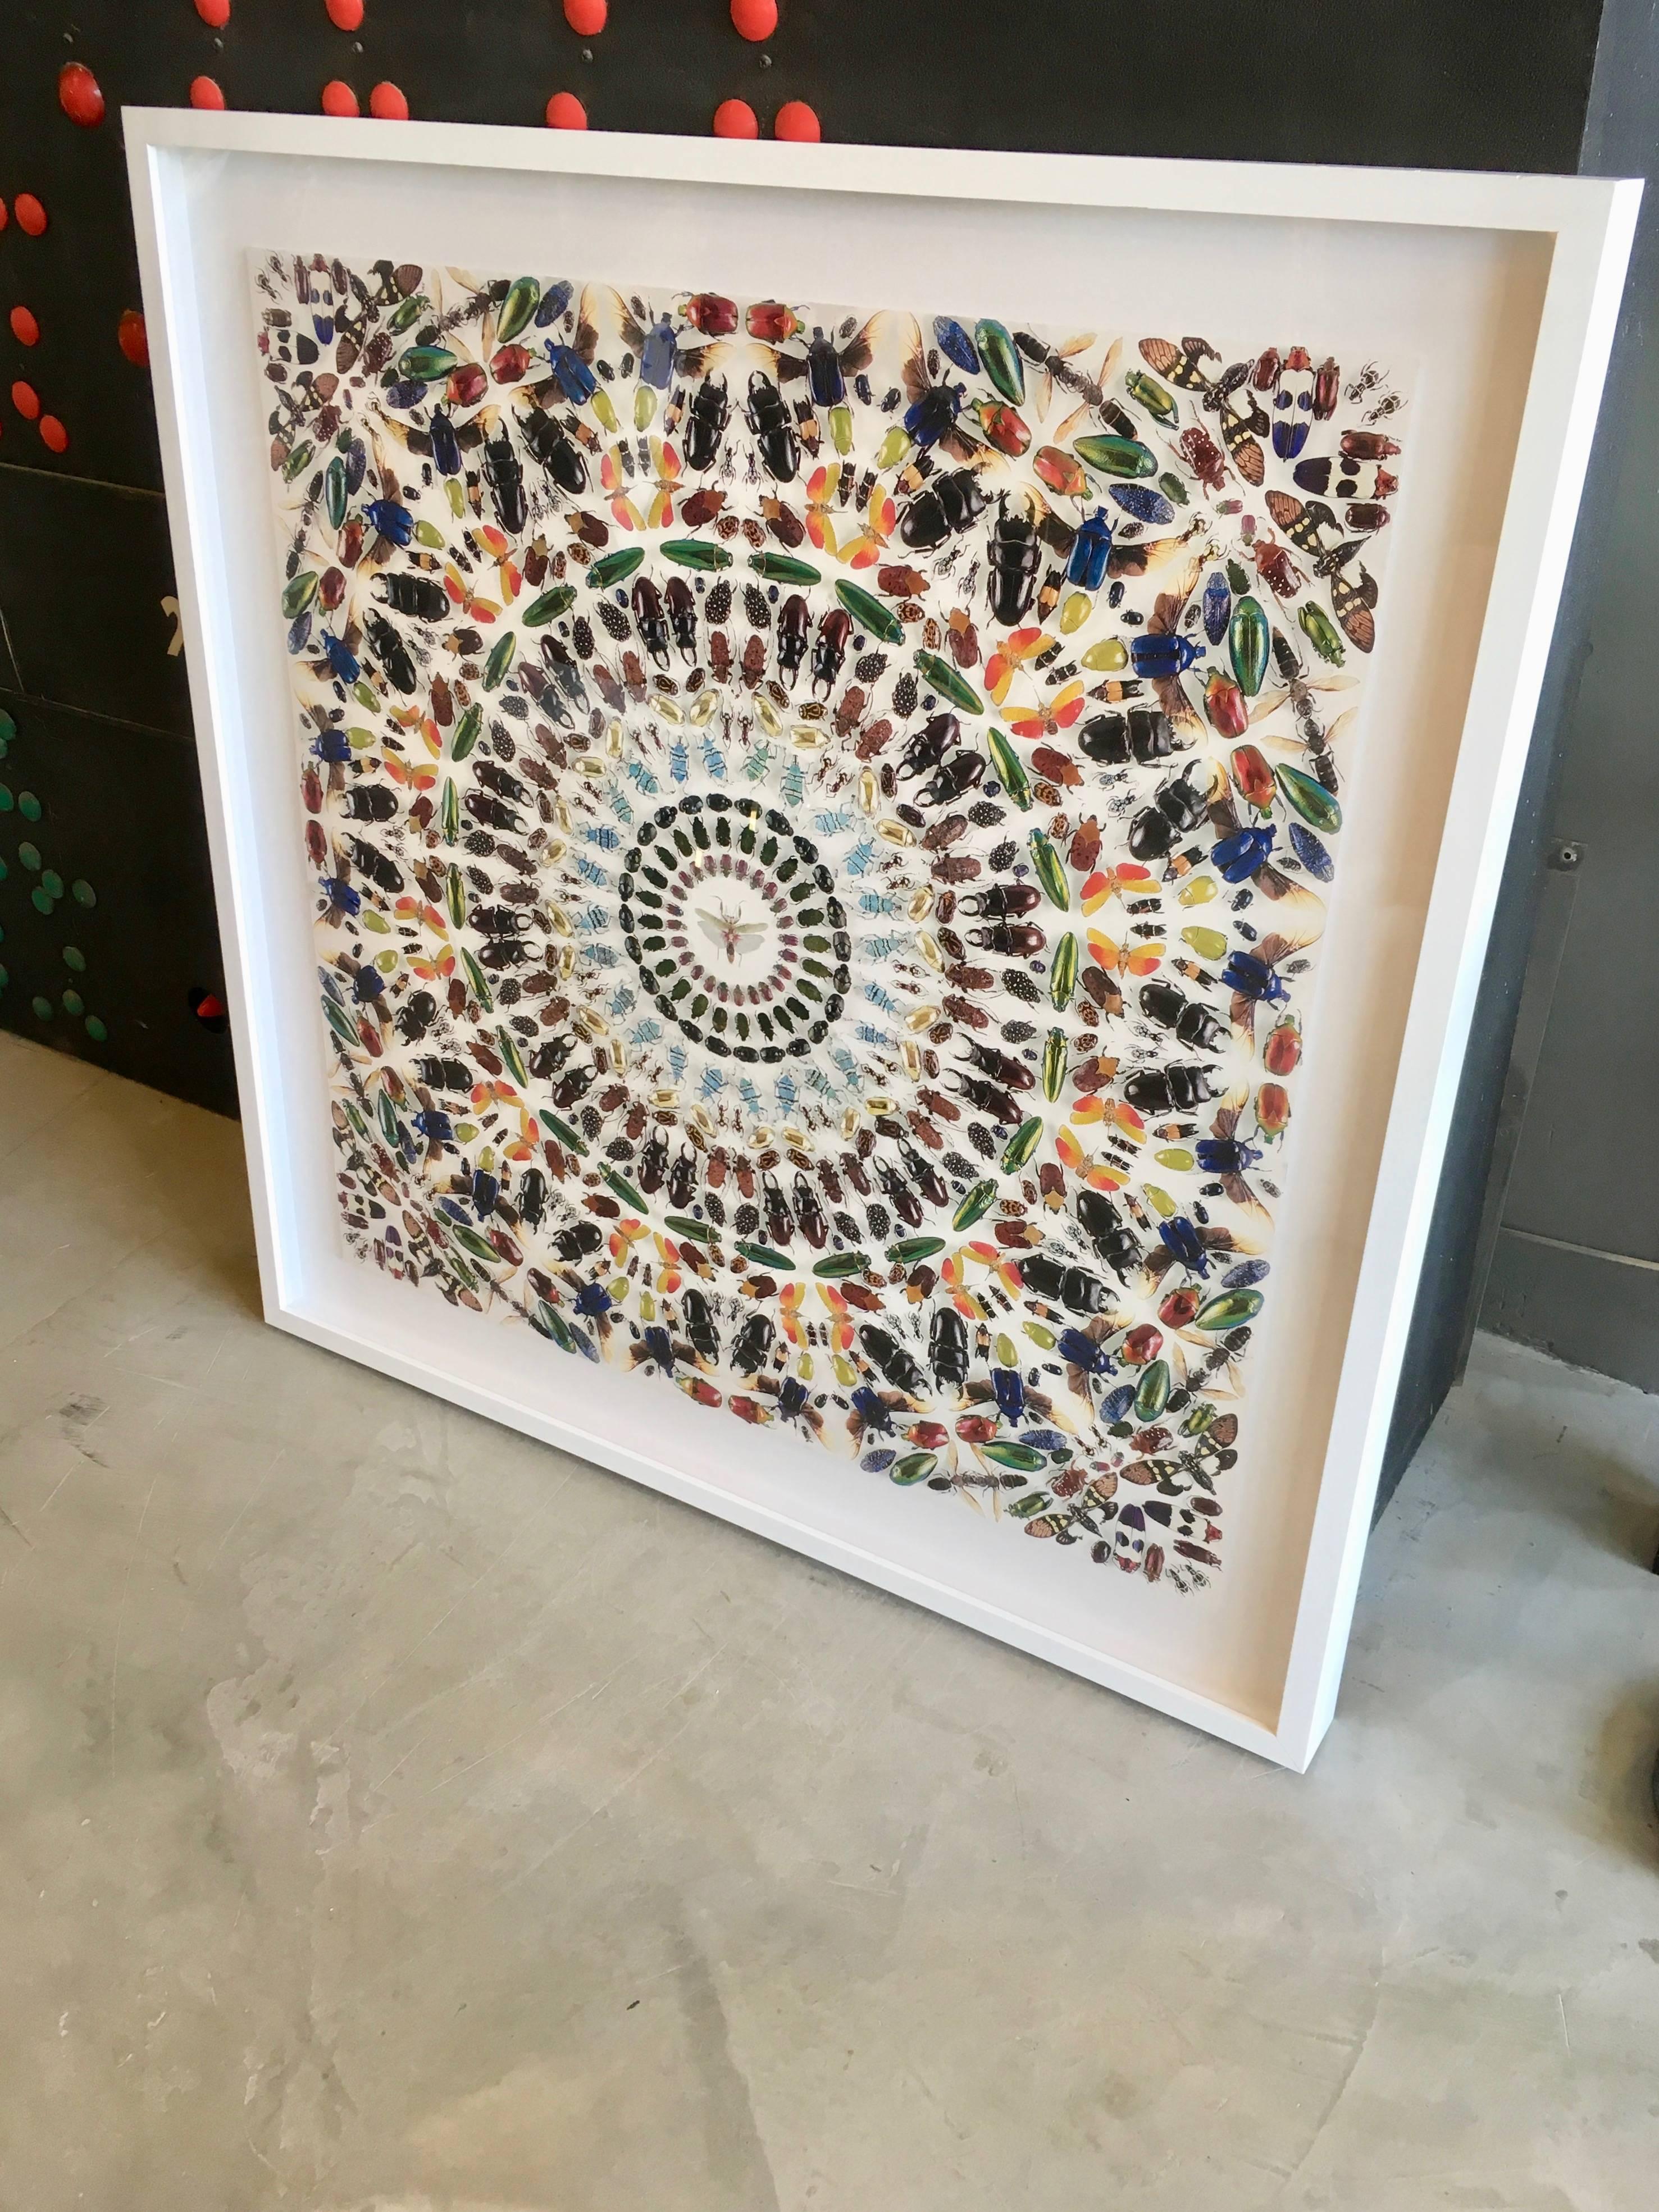 Cool piece of wall art by Damien Hirst. This wallpaper block features hundreds of different insects arranged in a kaleidoscope. Floated and newly framed.